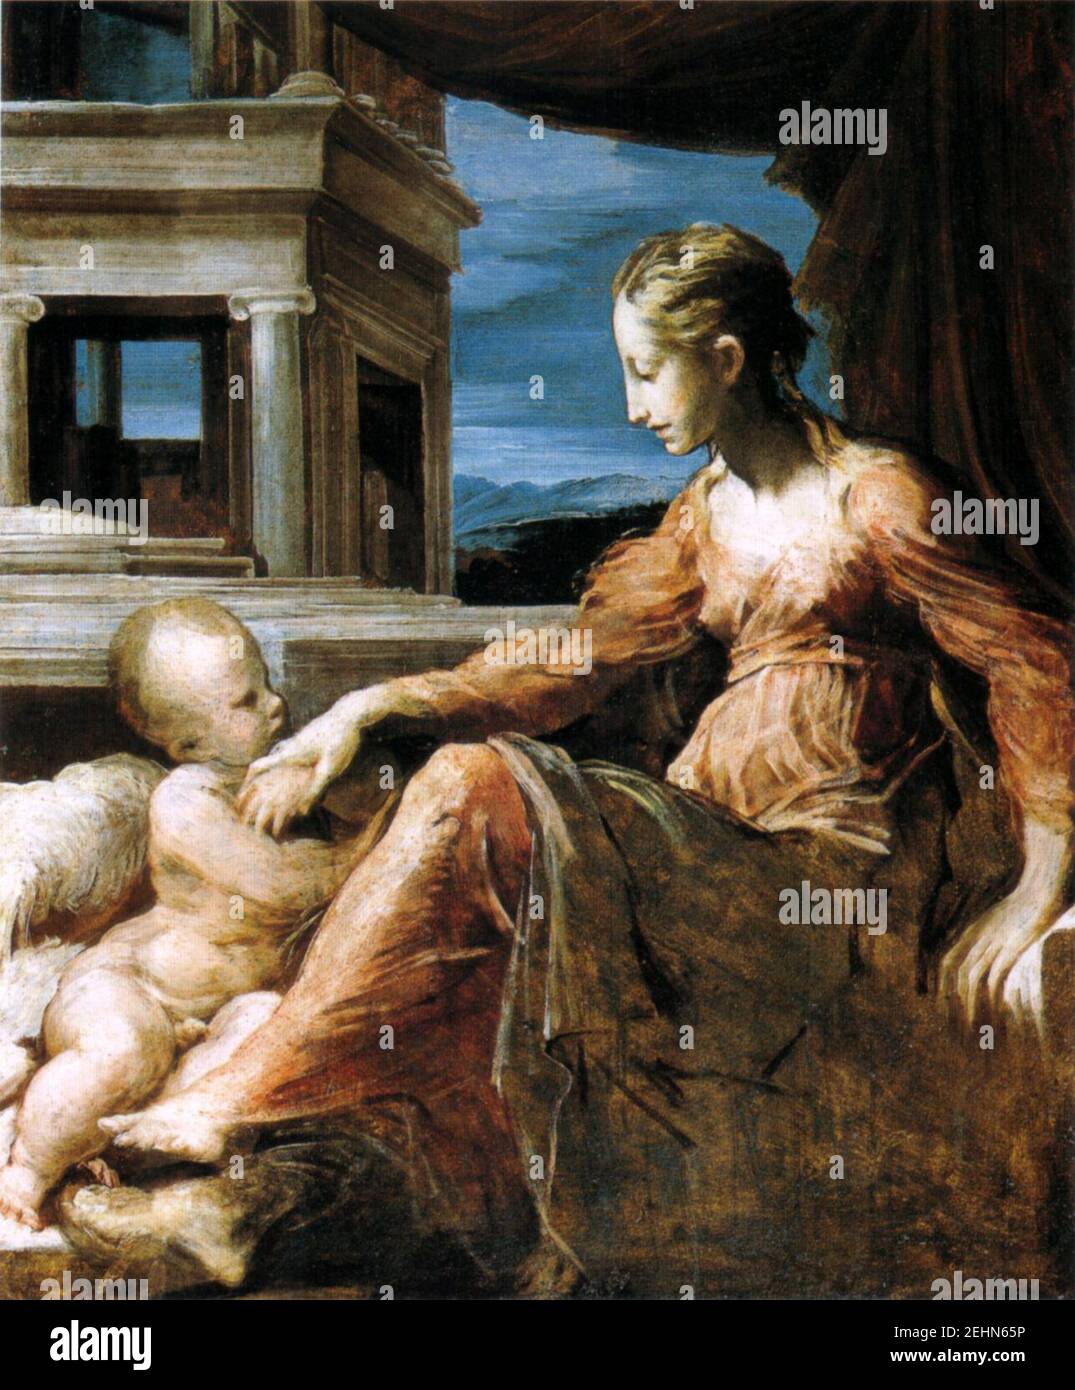 Galeries Parmigianino, madonna col bambino courtauld. Banque D'Images